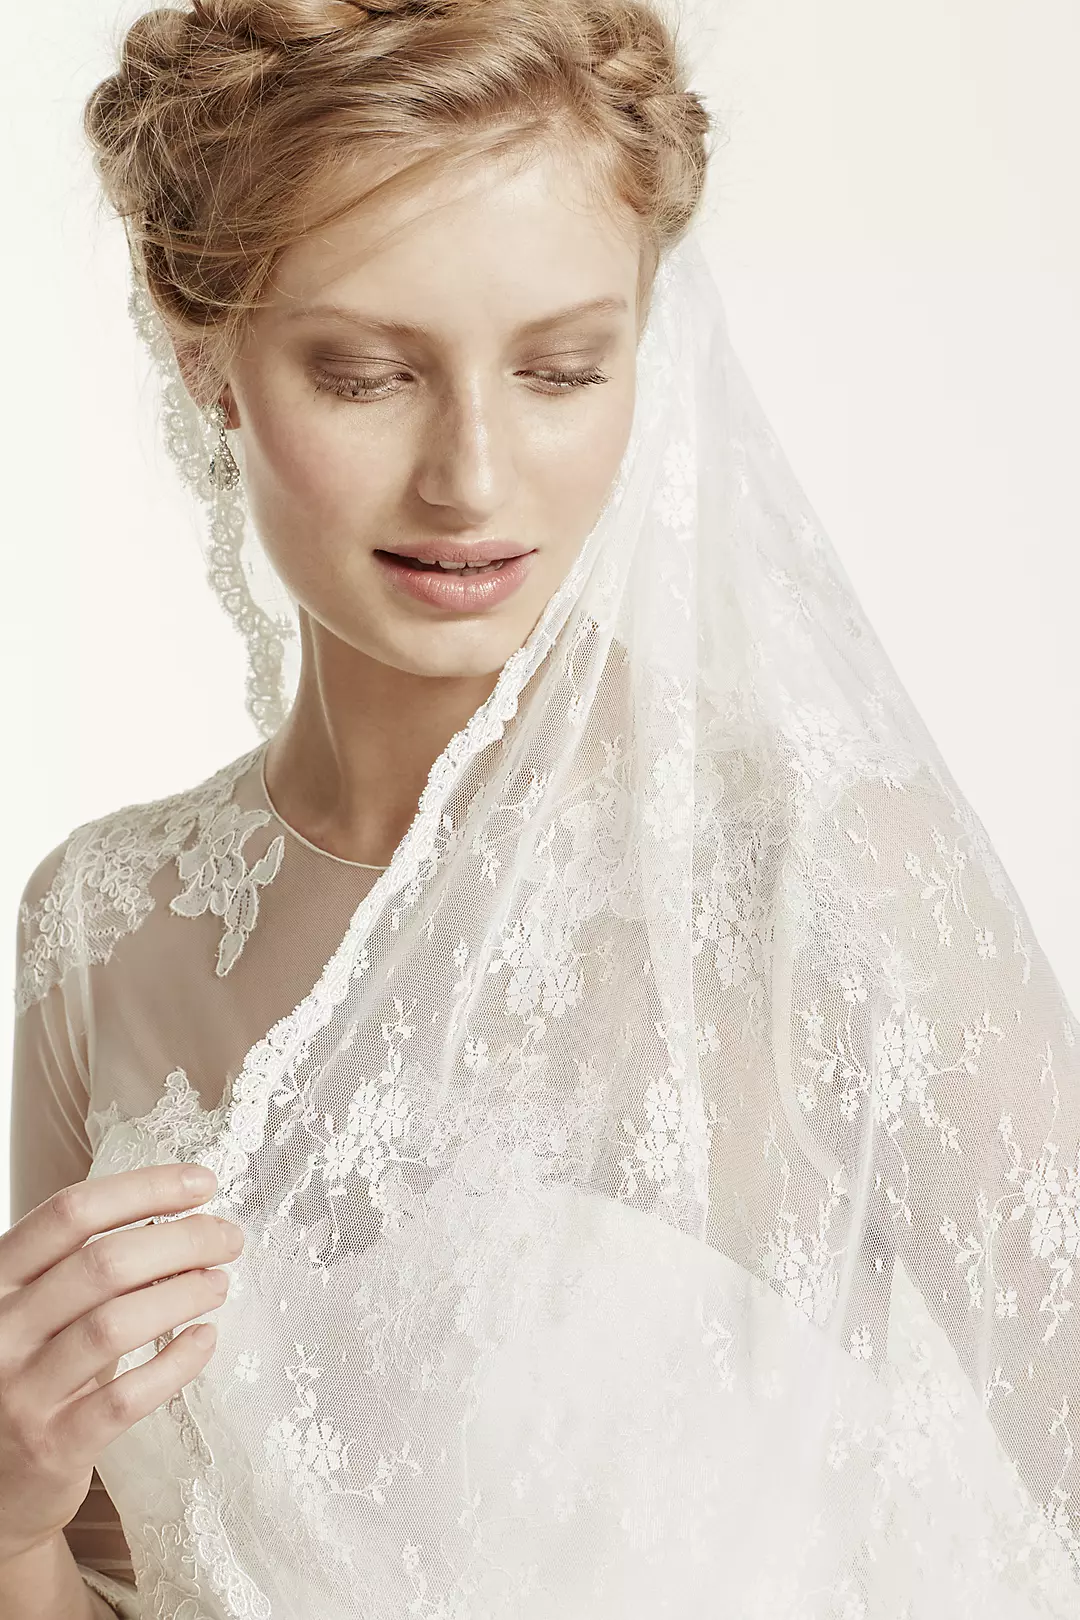 Single Tier All Over Lace Floral Mid Veil Image 3